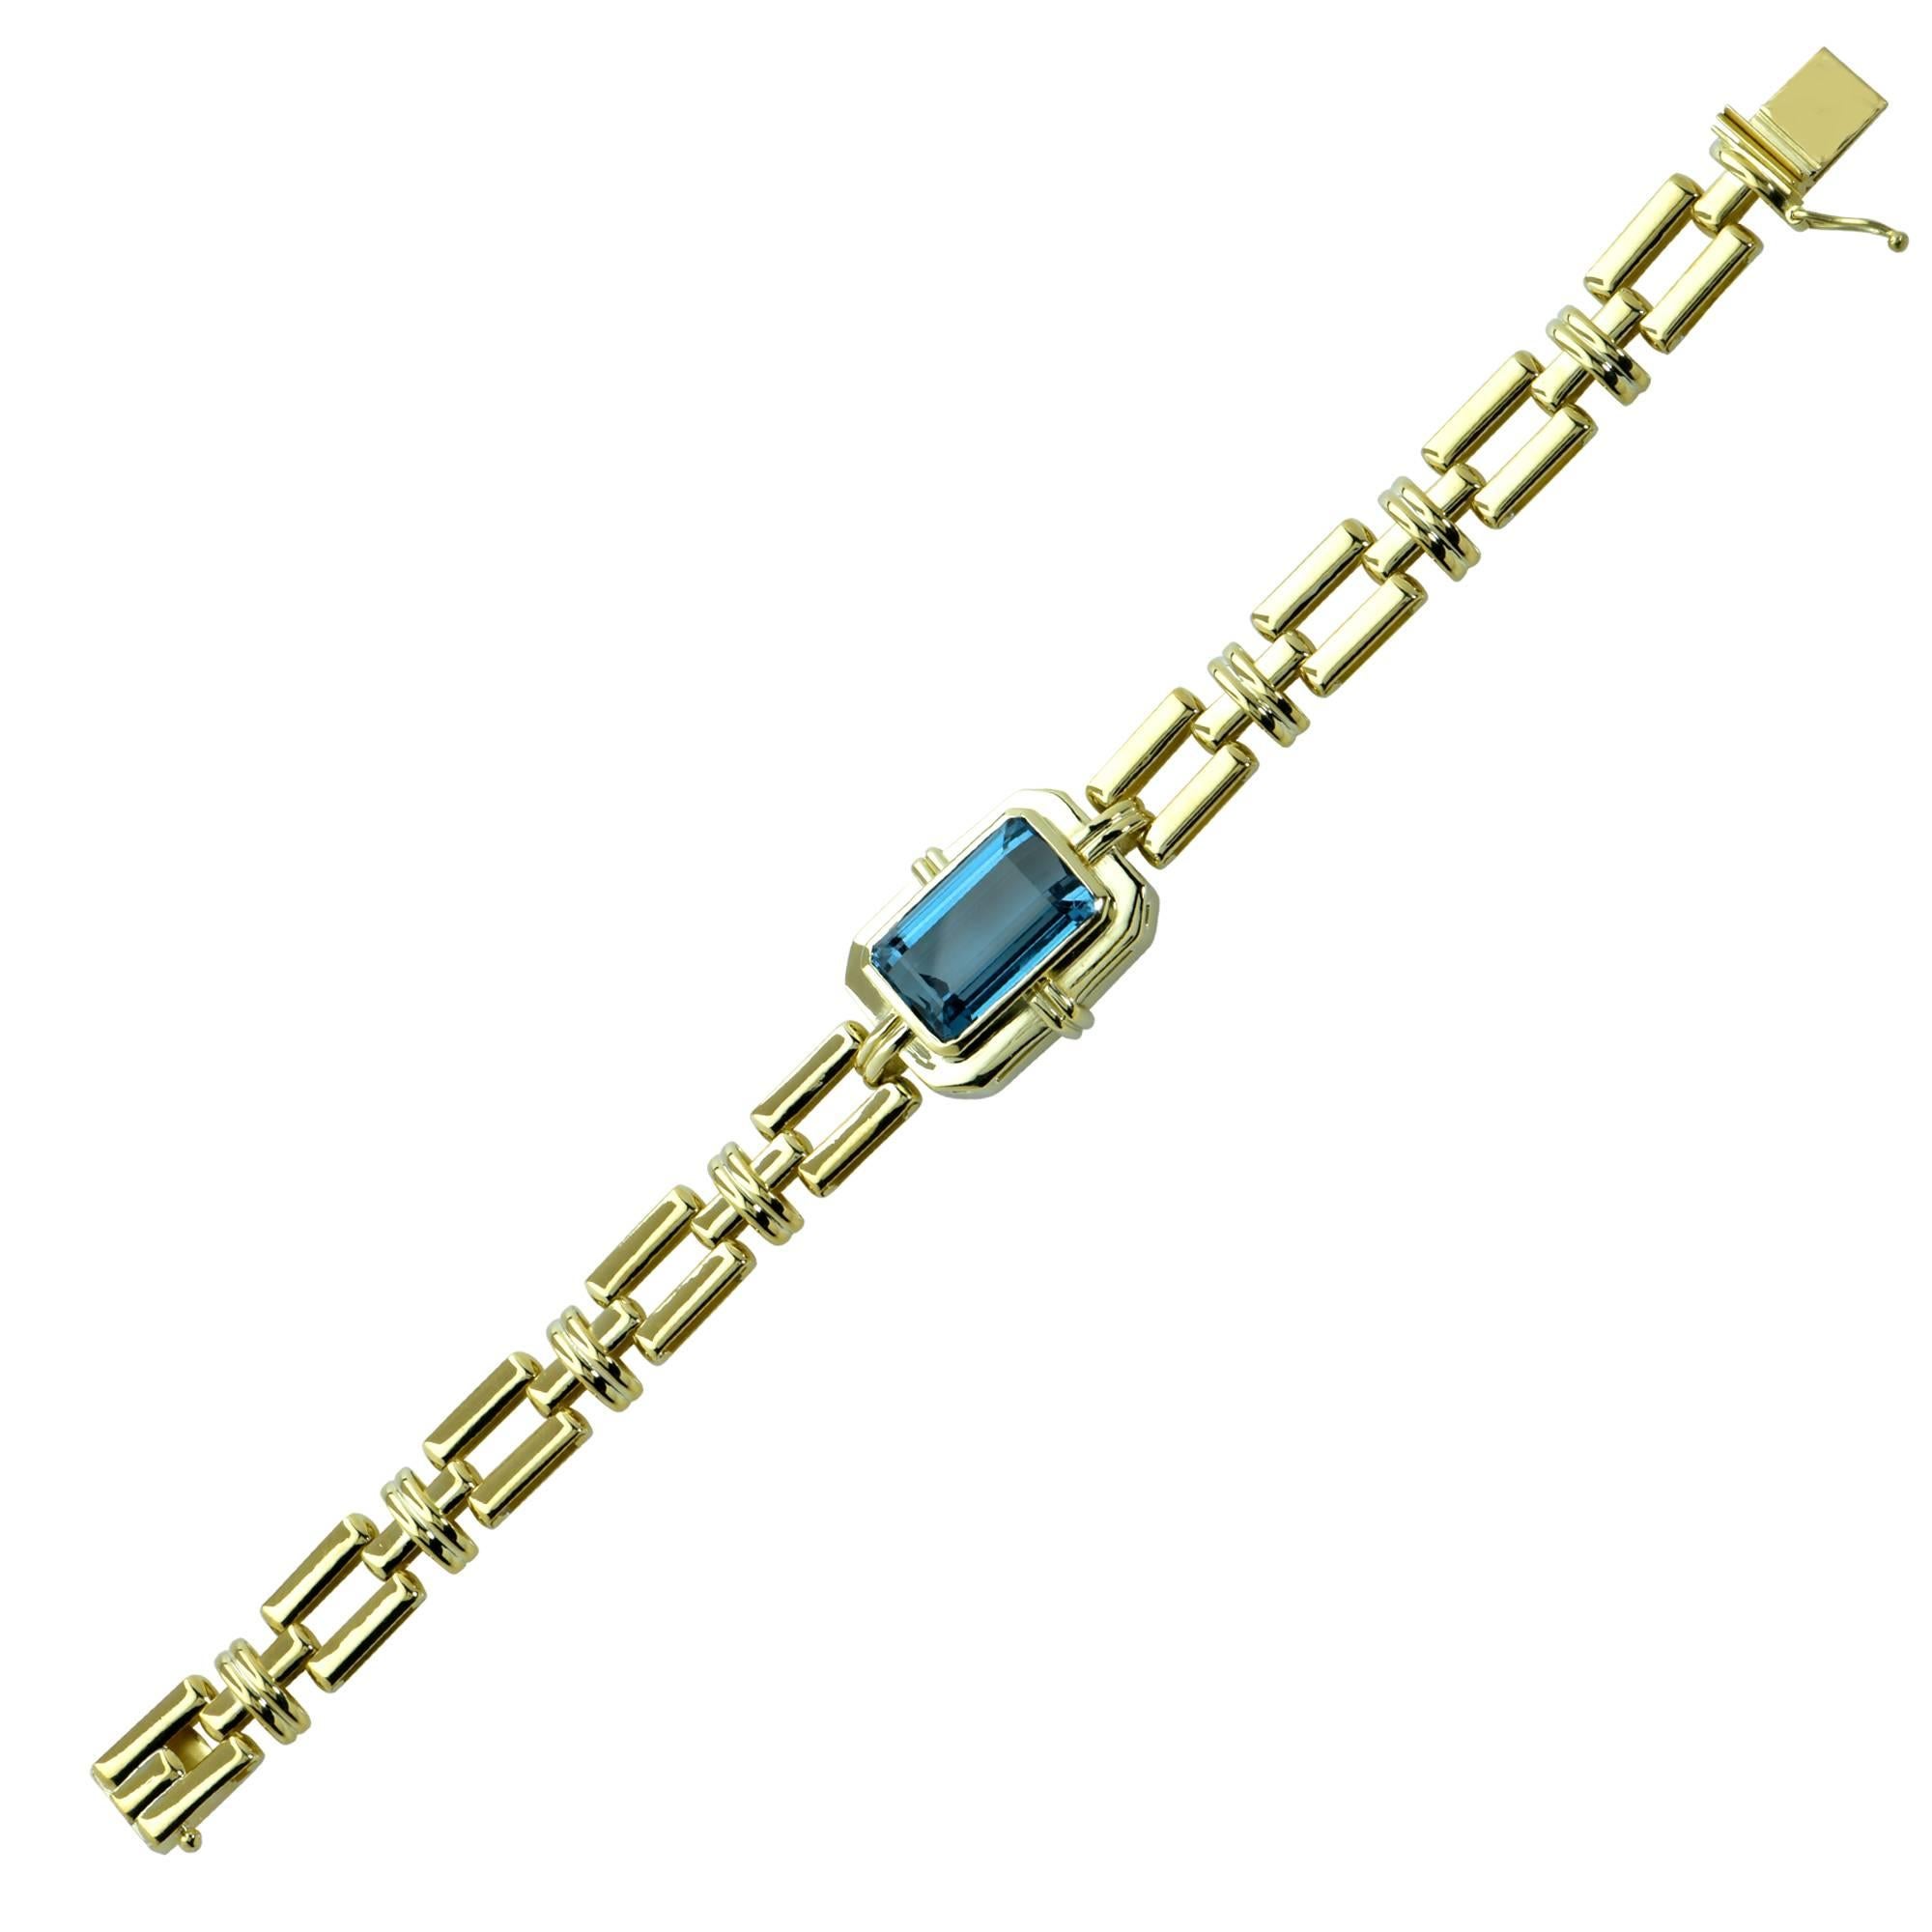 This exotic 18 Karat Yellow Gold link bracelet features a spectacular electric blue emerald cut Topaz weighing approximately 12 carats, framed in 18 karat Yellow Gold. The geometric lines of the links of this bracelet superbly compliment the cut of